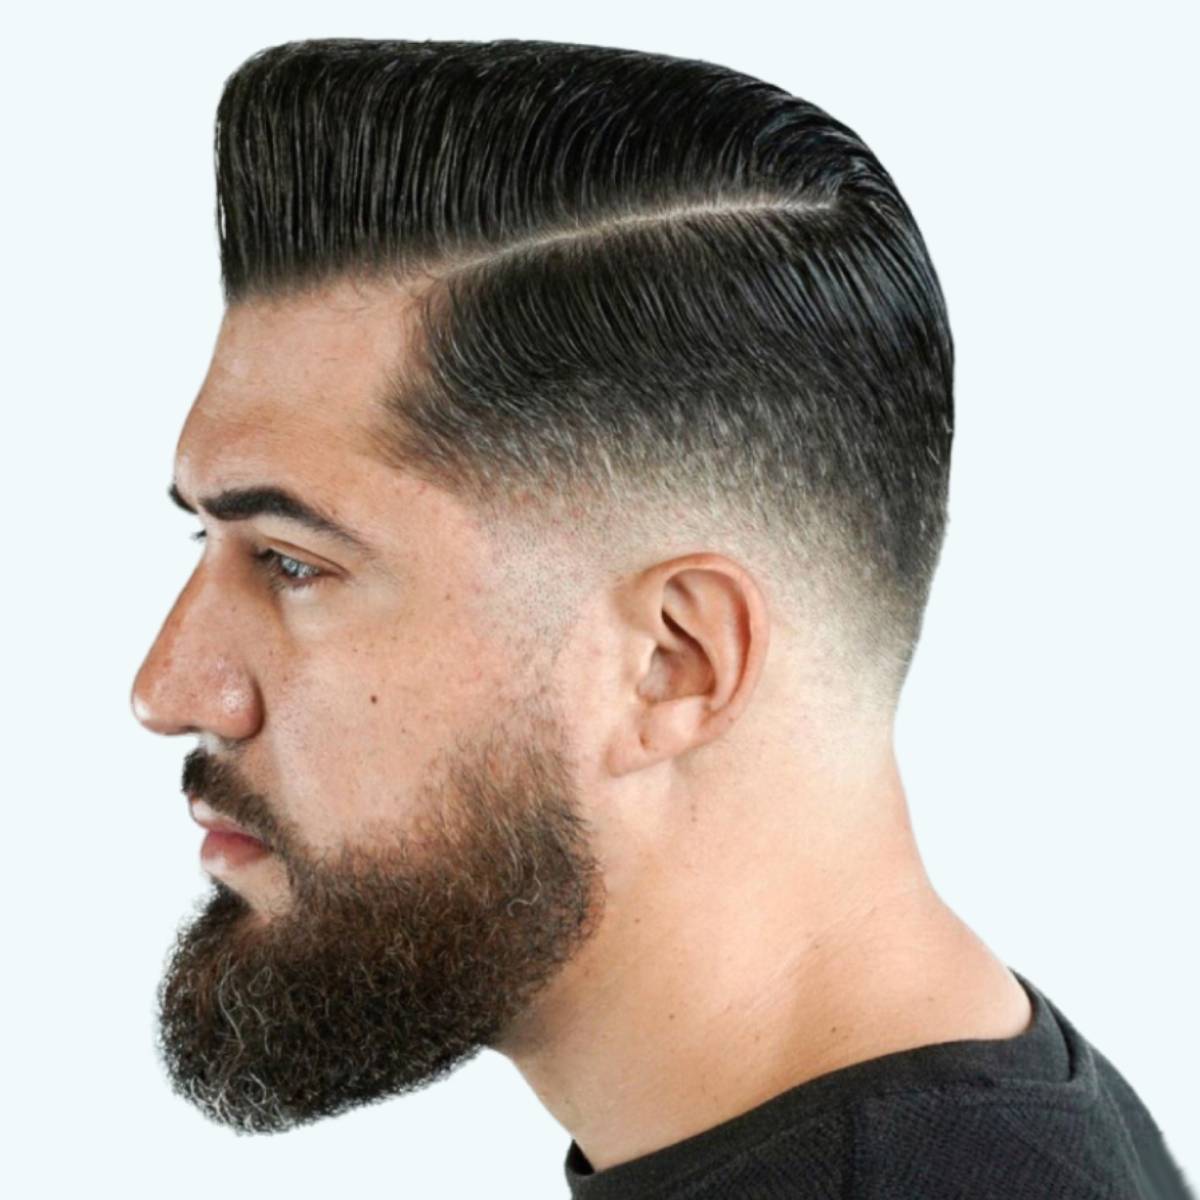 50 Taper Haircut Ideas Men Are Getting Right Now